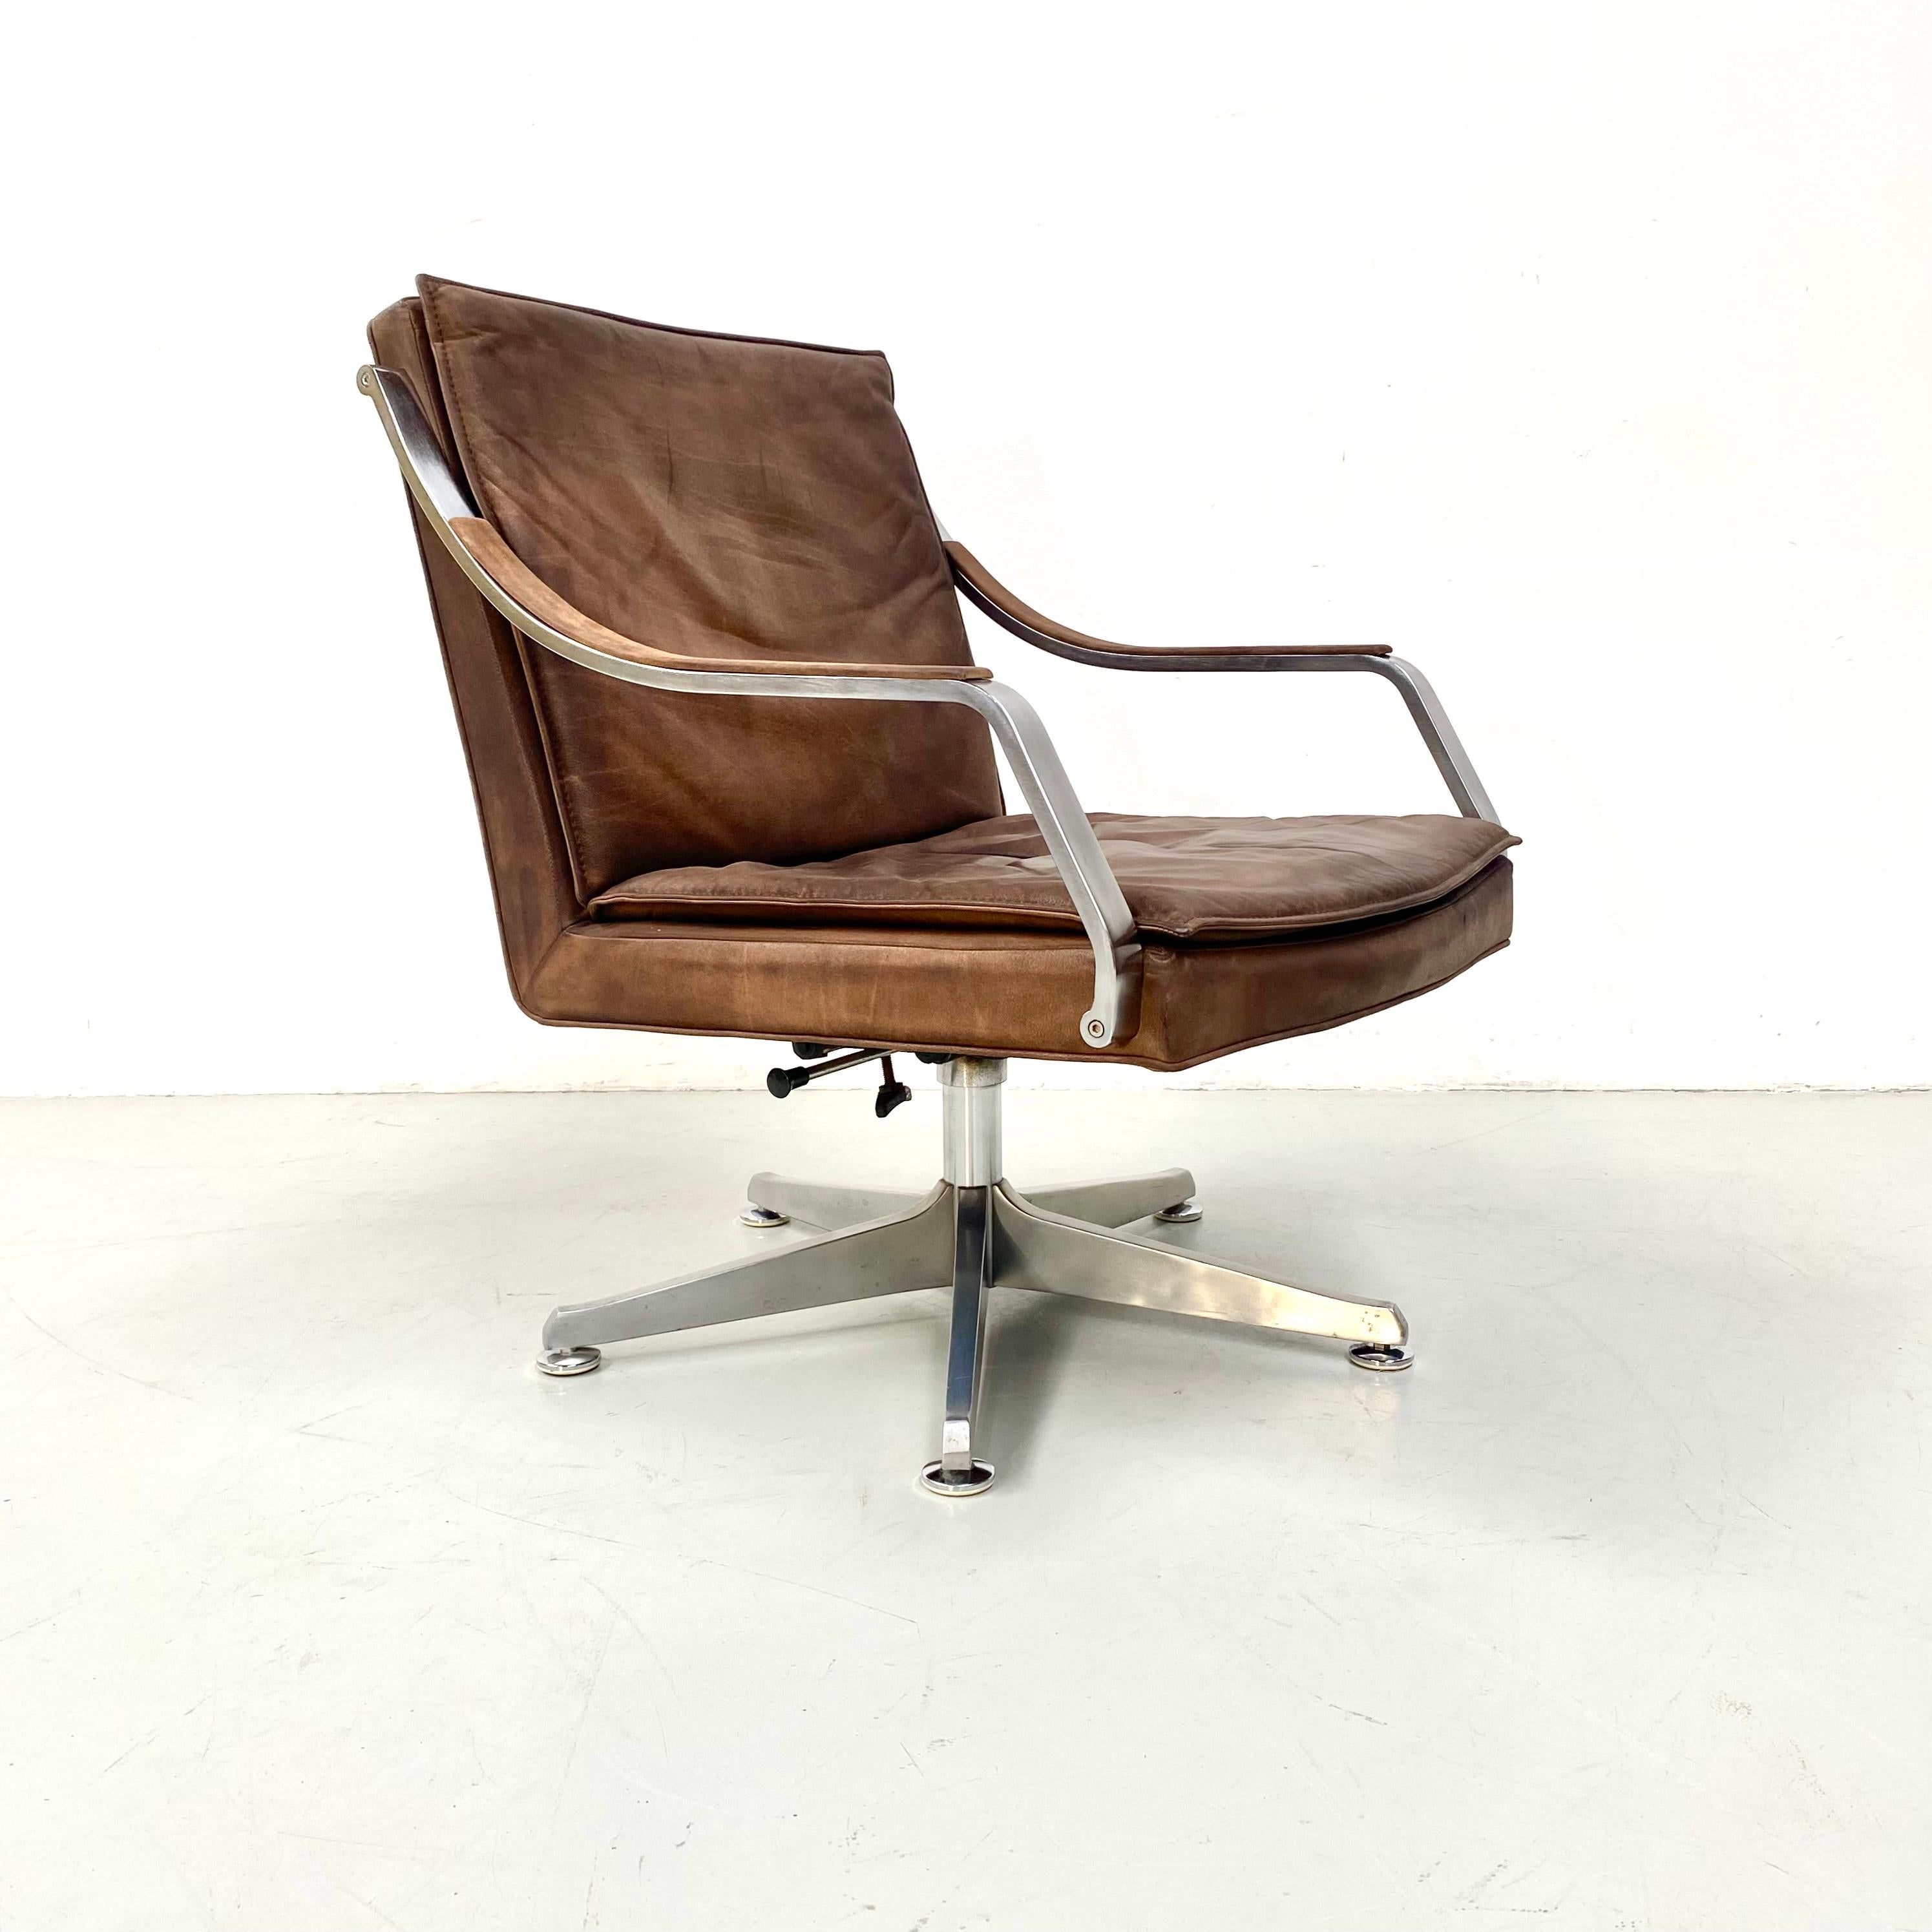 Aluminum Vintage German Cantilever Conference Chairs by  R. Glatzel for Knoll, 1980s.